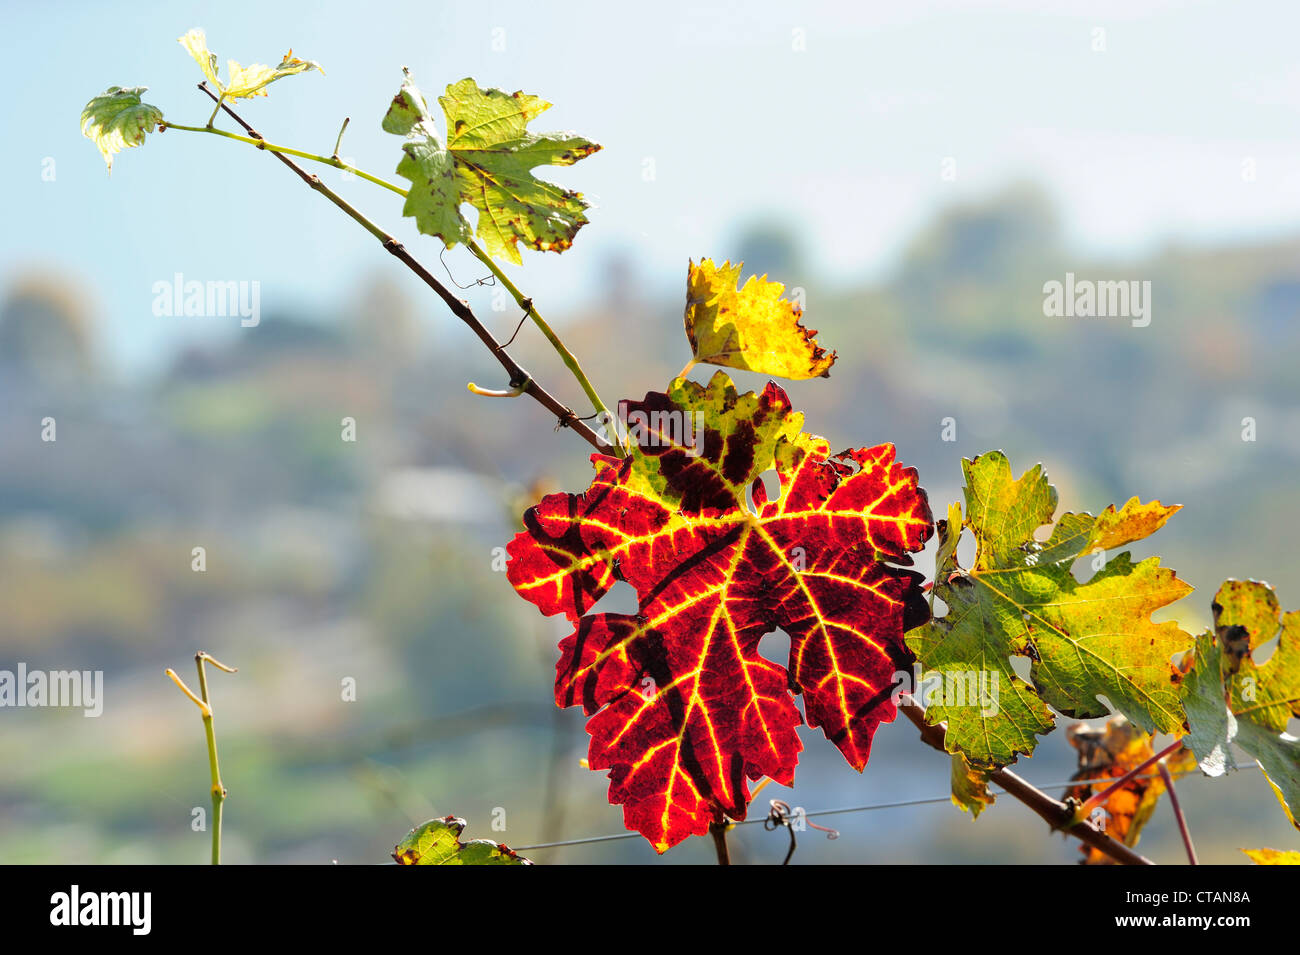 Vineleaf in autumn colours with blue sky, lake Kalterer See, South Tyrol, Italy, Europe Stock Photo